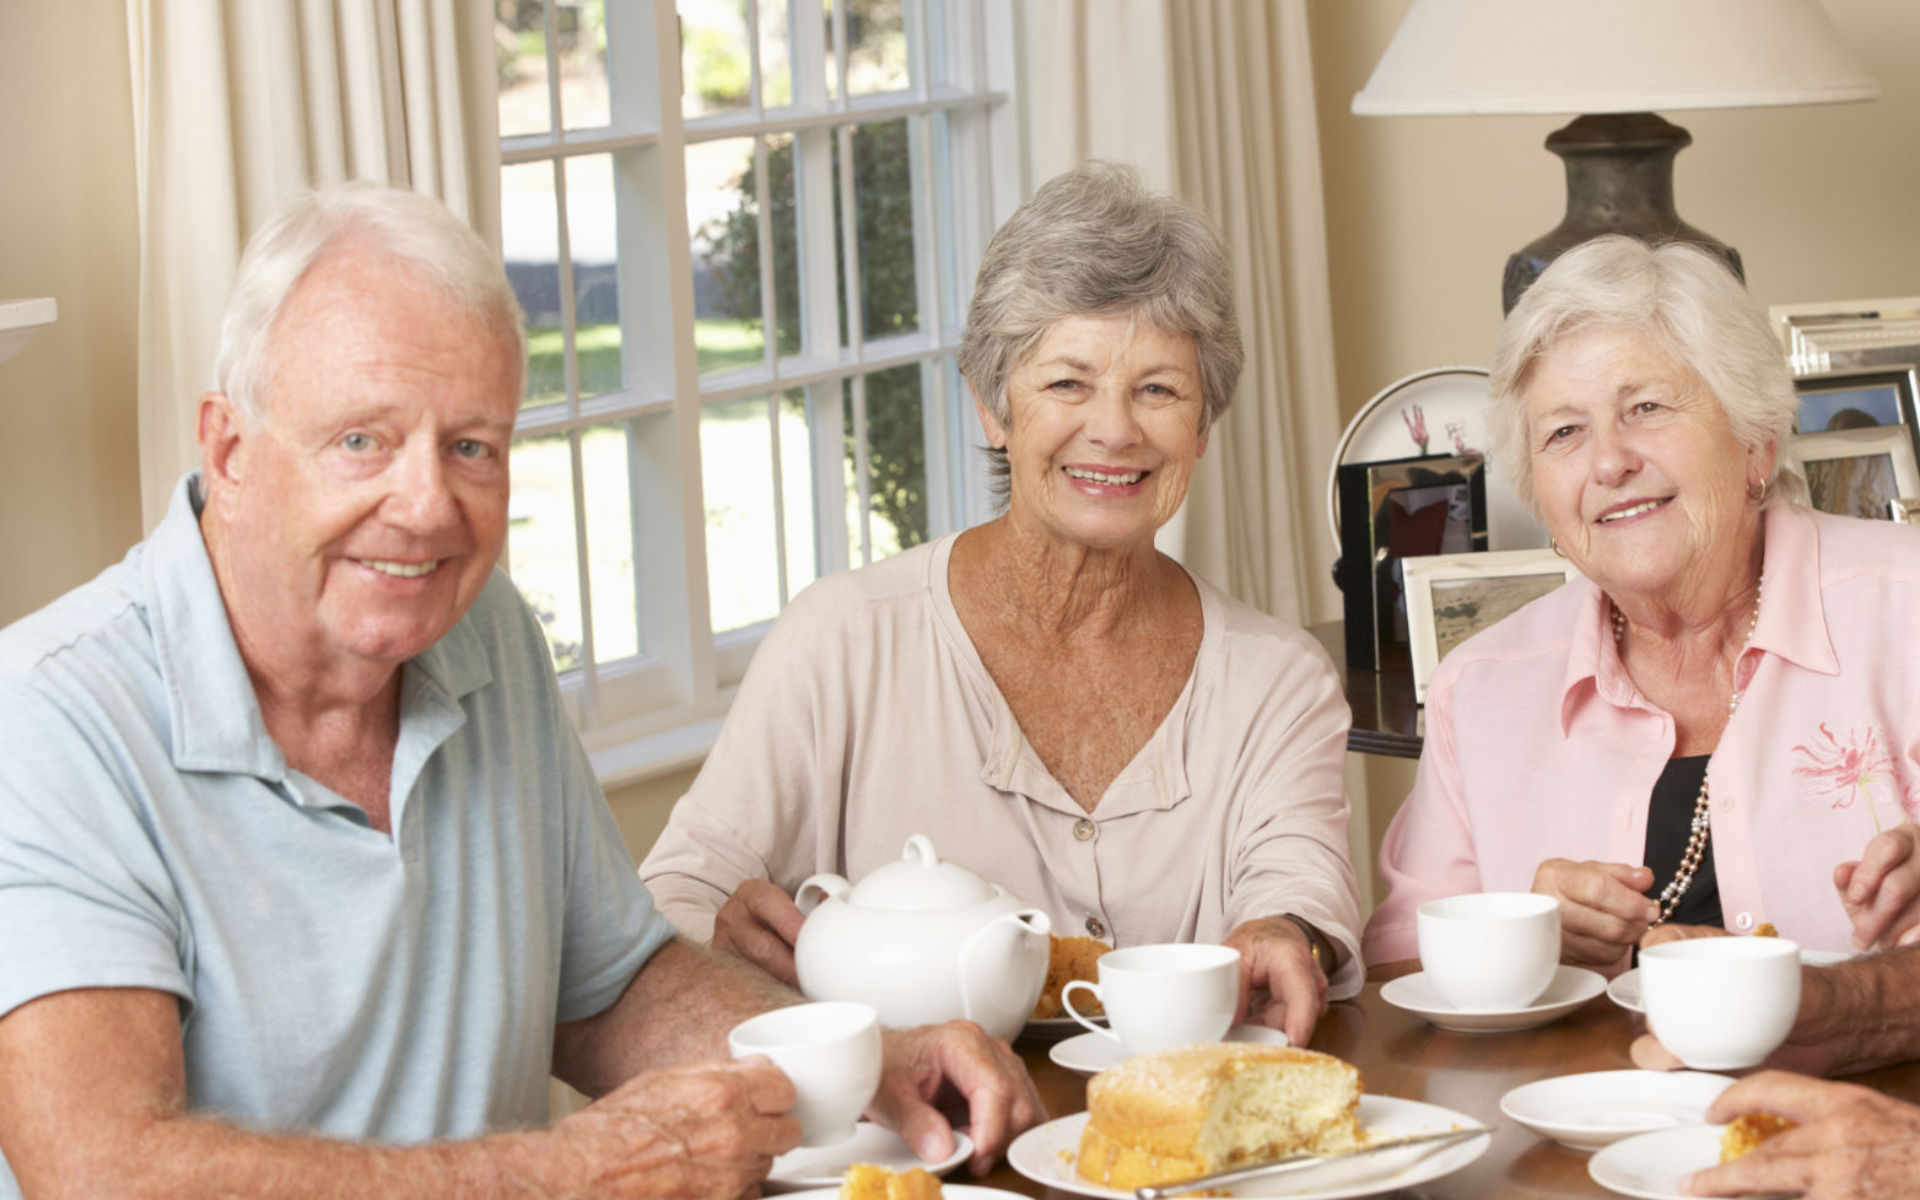 Two broadly smiling senior women and a man having a cake and coffee.